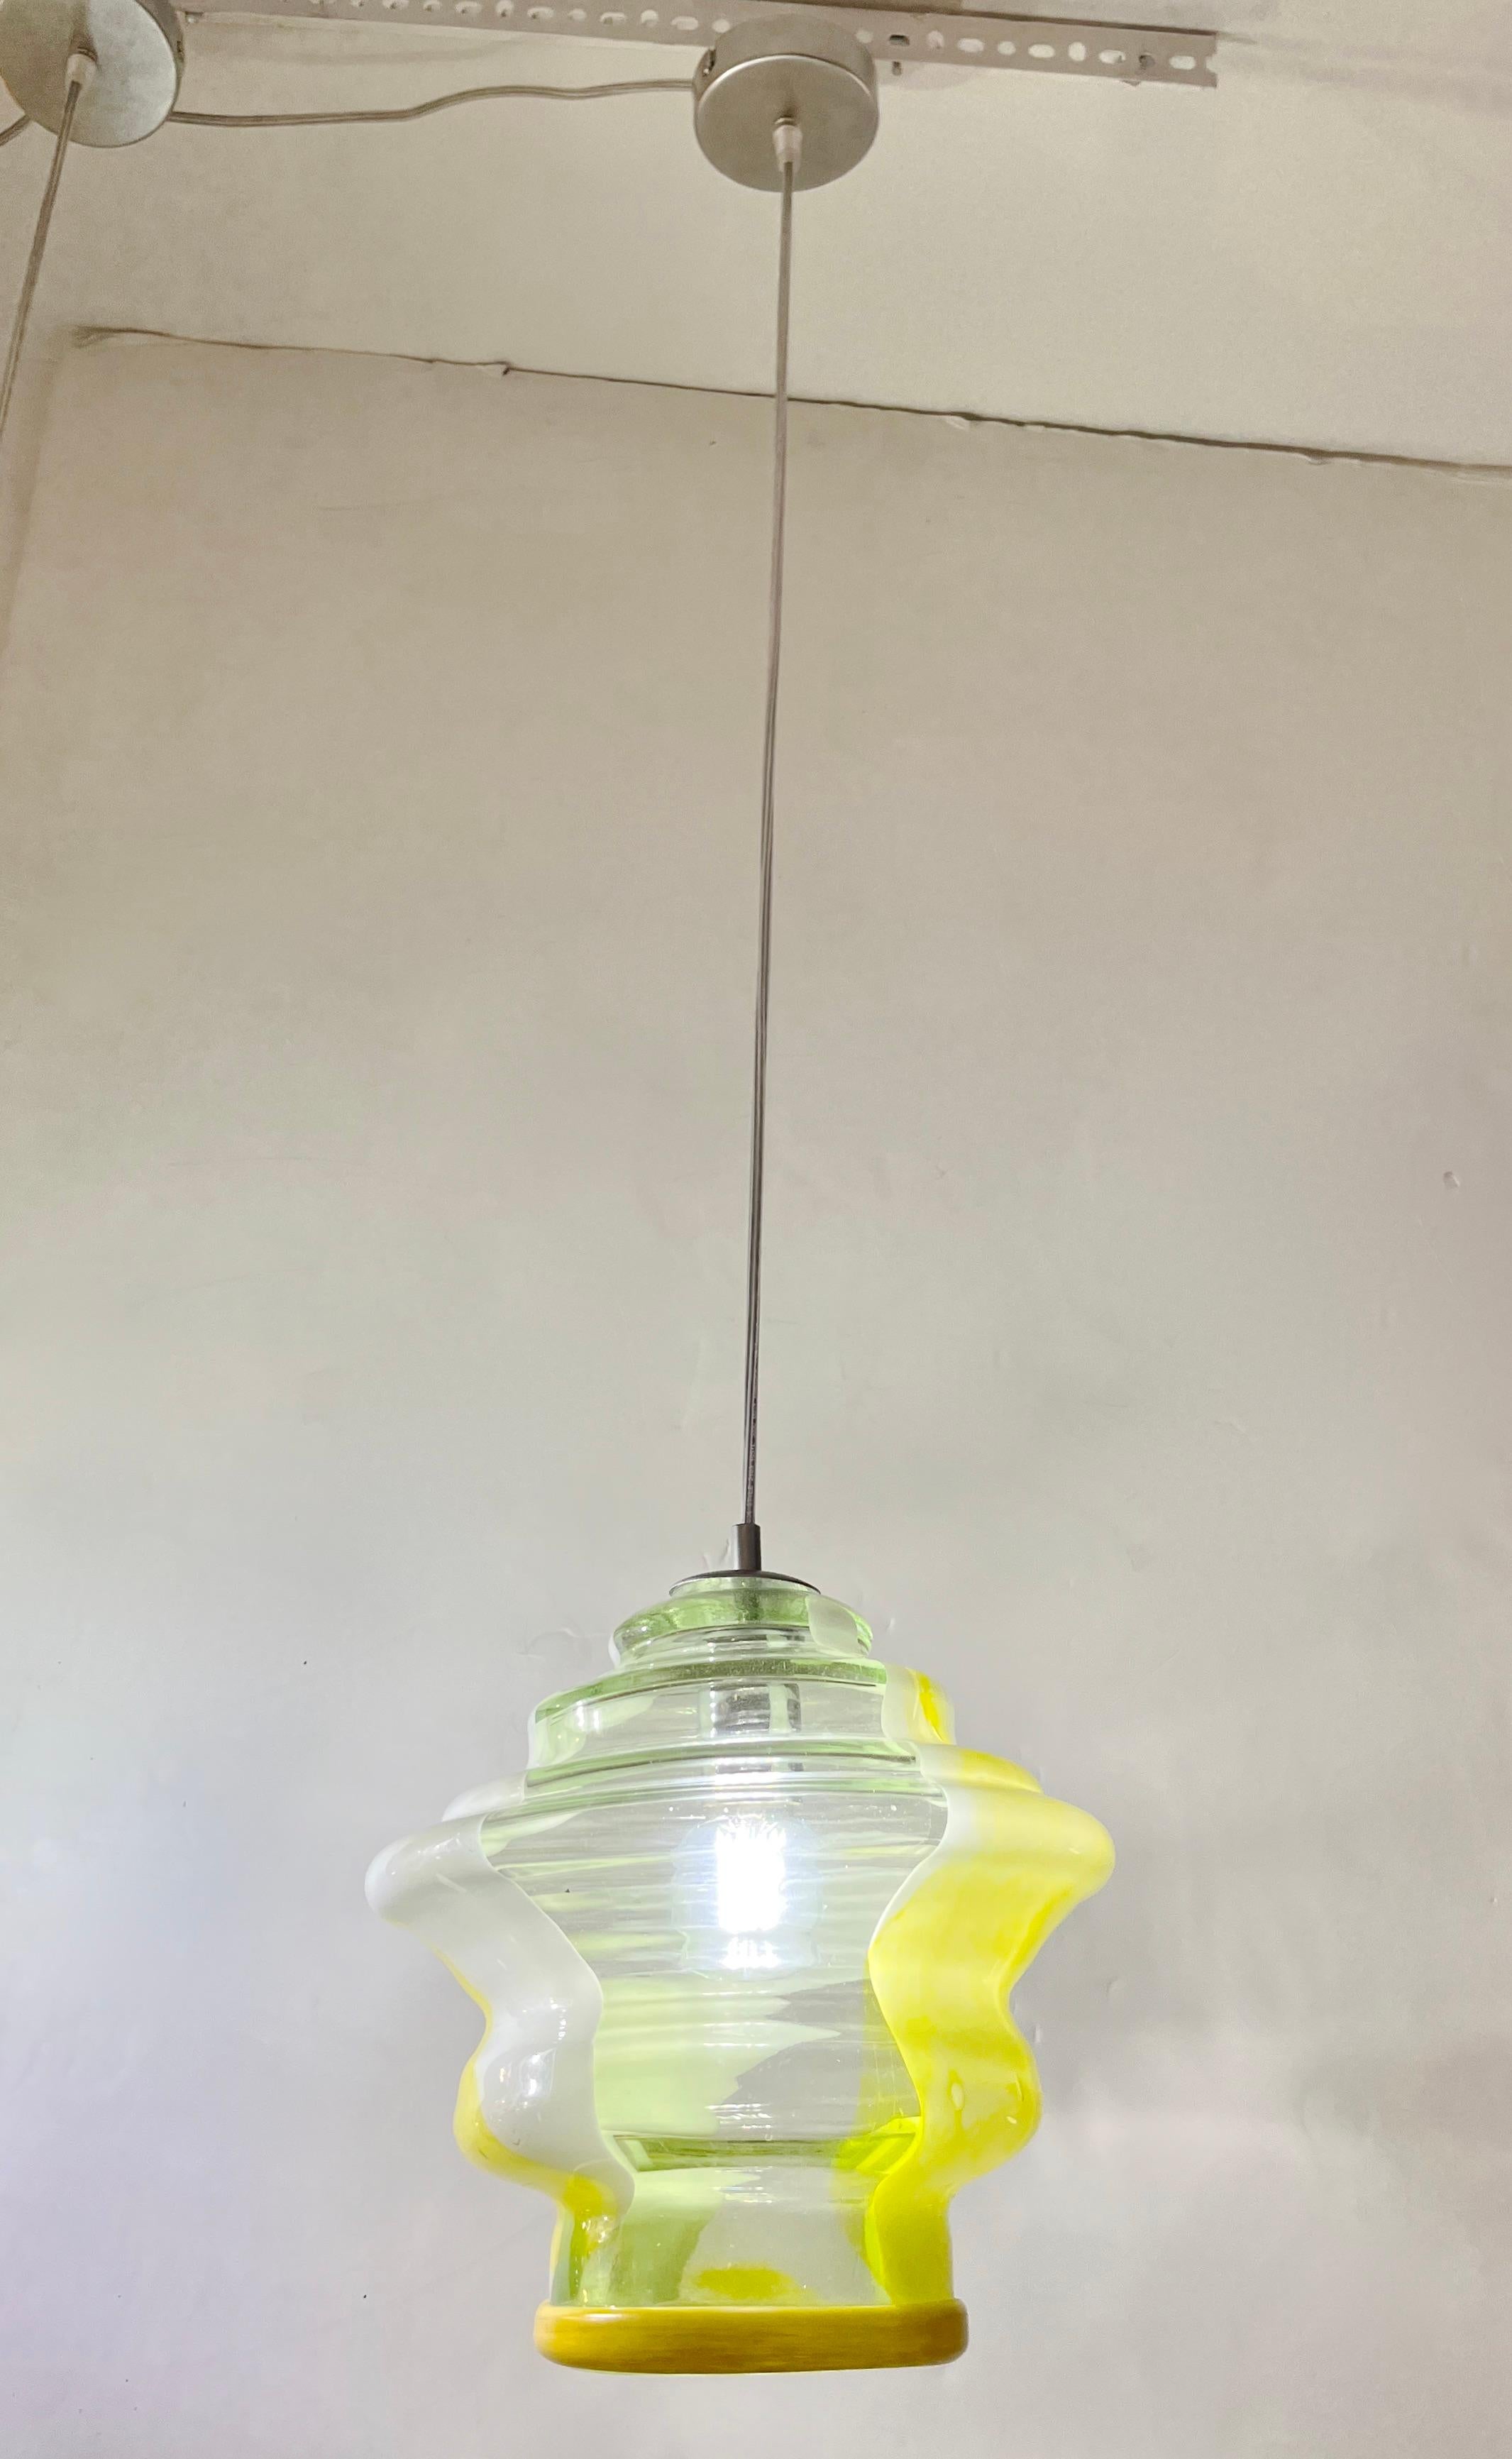 Fun and elegant Italian contemporary custom-made pendant chandelier, of organic modern design, entirely handcrafted with adjustable height, consisting of a sexy multi level stepped circular shade in translucent lemon yellow blown Murano glass